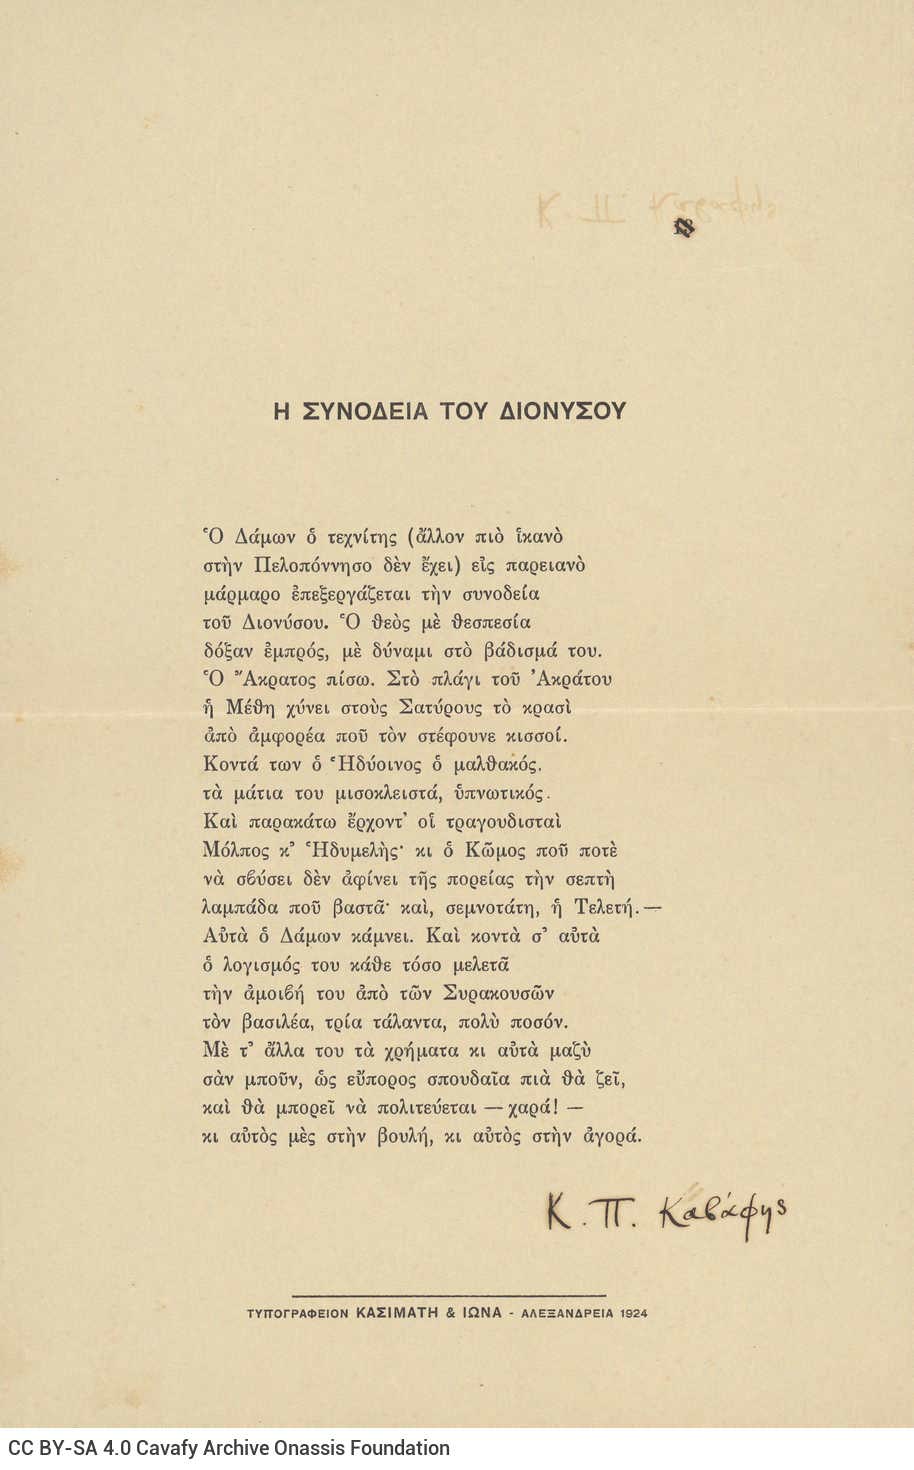 The poem "The Retinue of Dionysus" on one side of a printed broadsheet. The poet's signature ("C. P. Cavafy") below the poem.